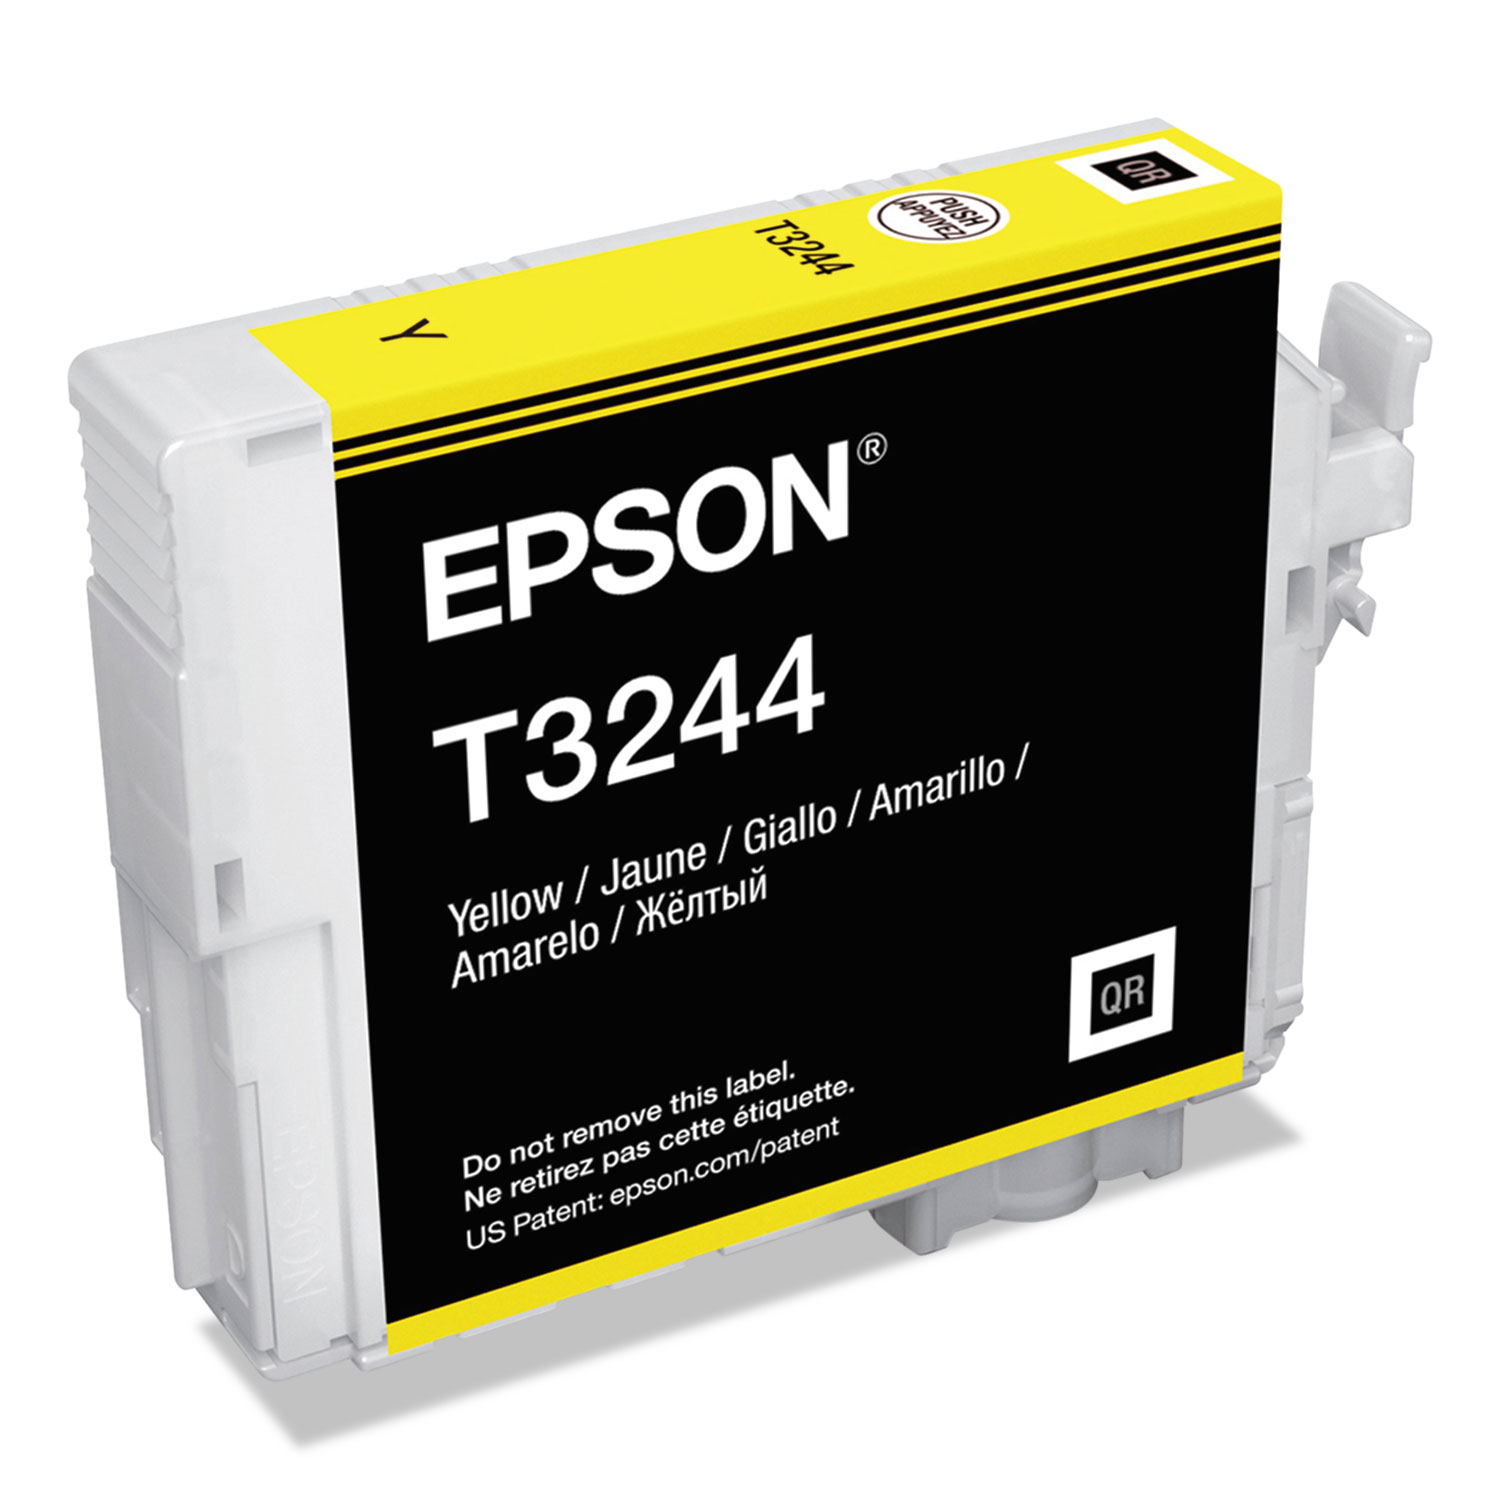  Epson T324420 T324420 (324) UltraChrome HG2 Ink, Yellow (EPST324420) 